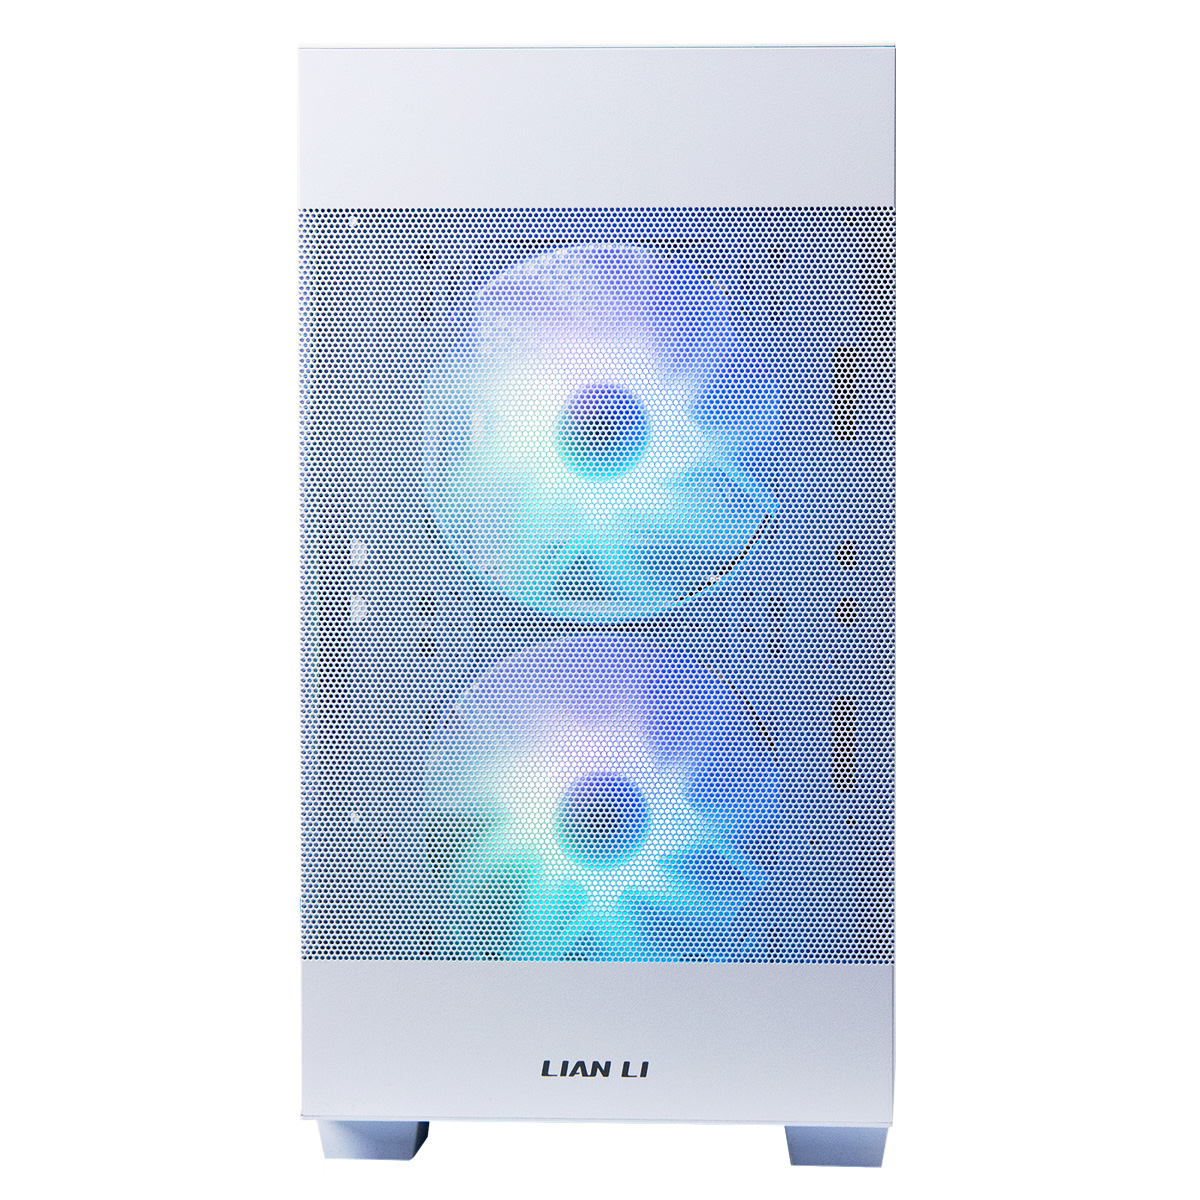 Overclockers UK - OcUK Gaming Radiance Frosty MK2 - Intel Core i5, RTX 3060 - Powered By Asus Gaming PC